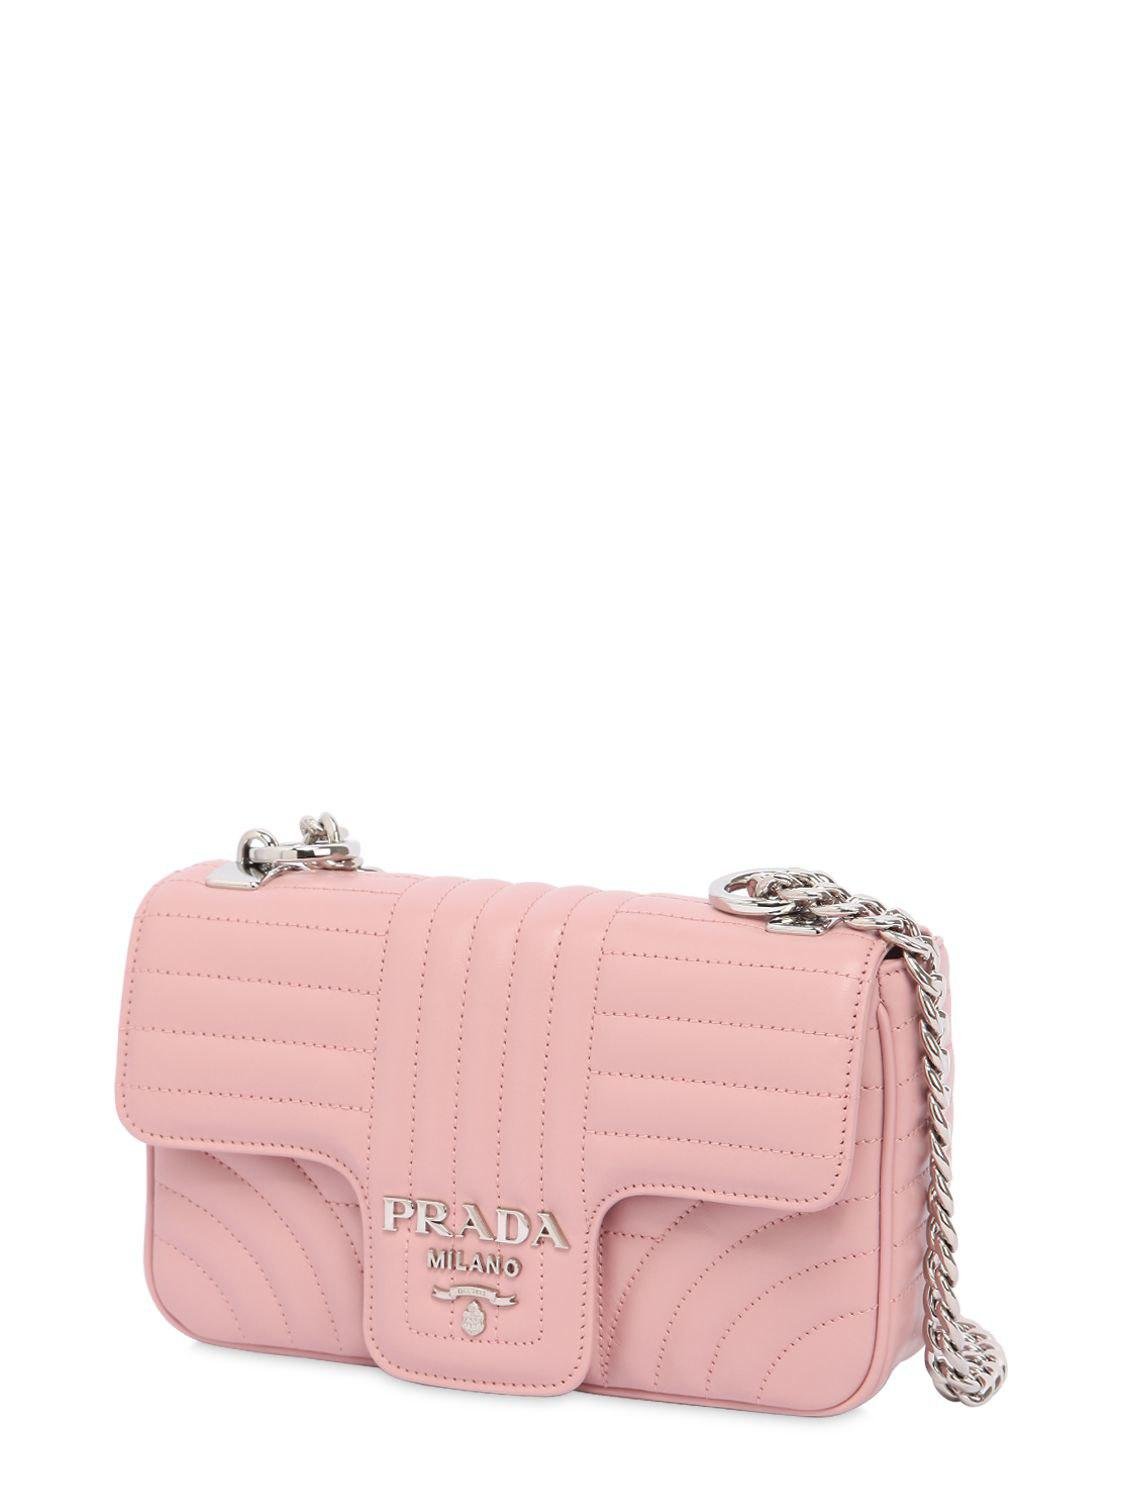 Prada Small Quilted Soft Leather Flap Bag in Pink | Lyst